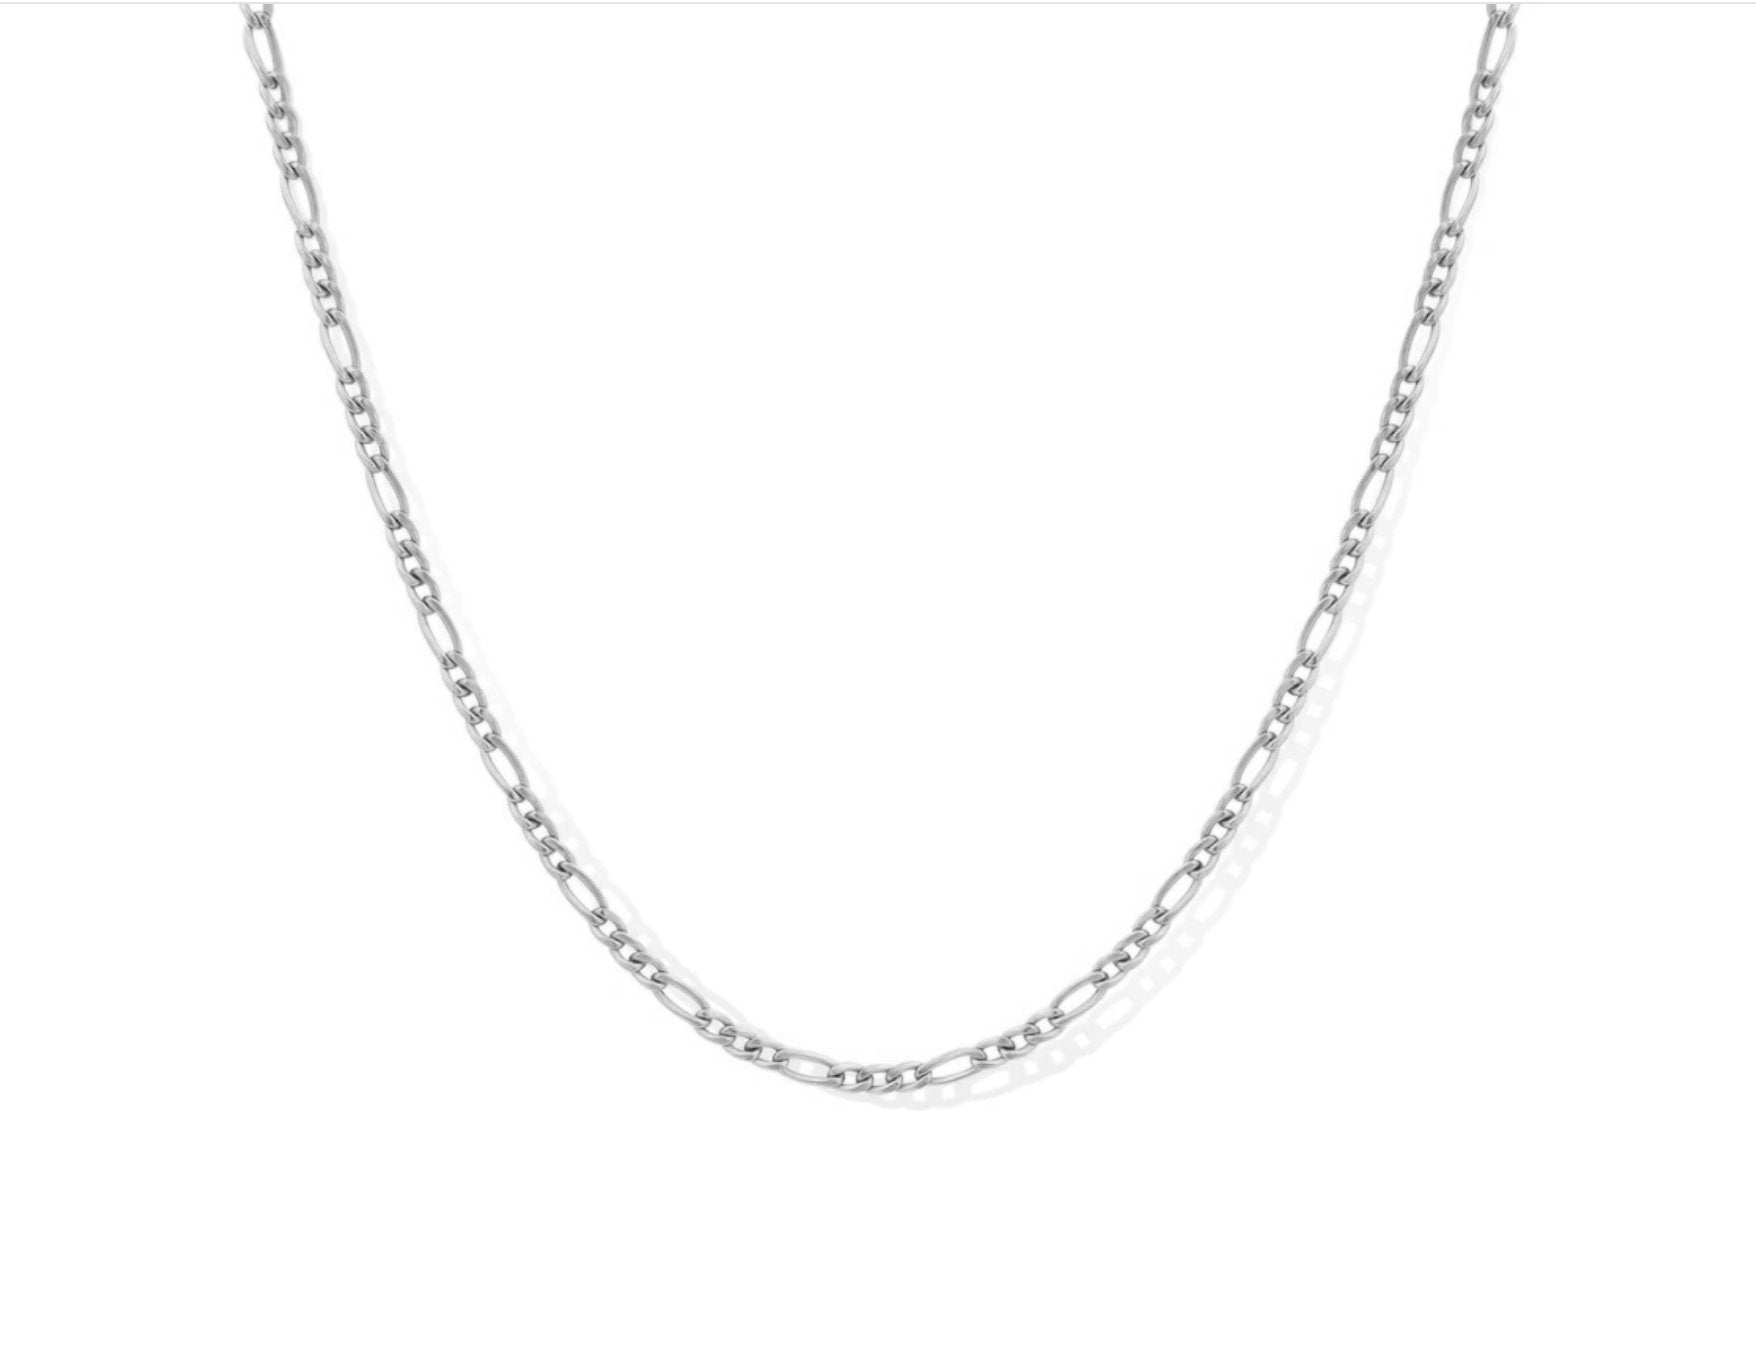 Gold Filled Figaro Chain Necklace - Camille Jewelry